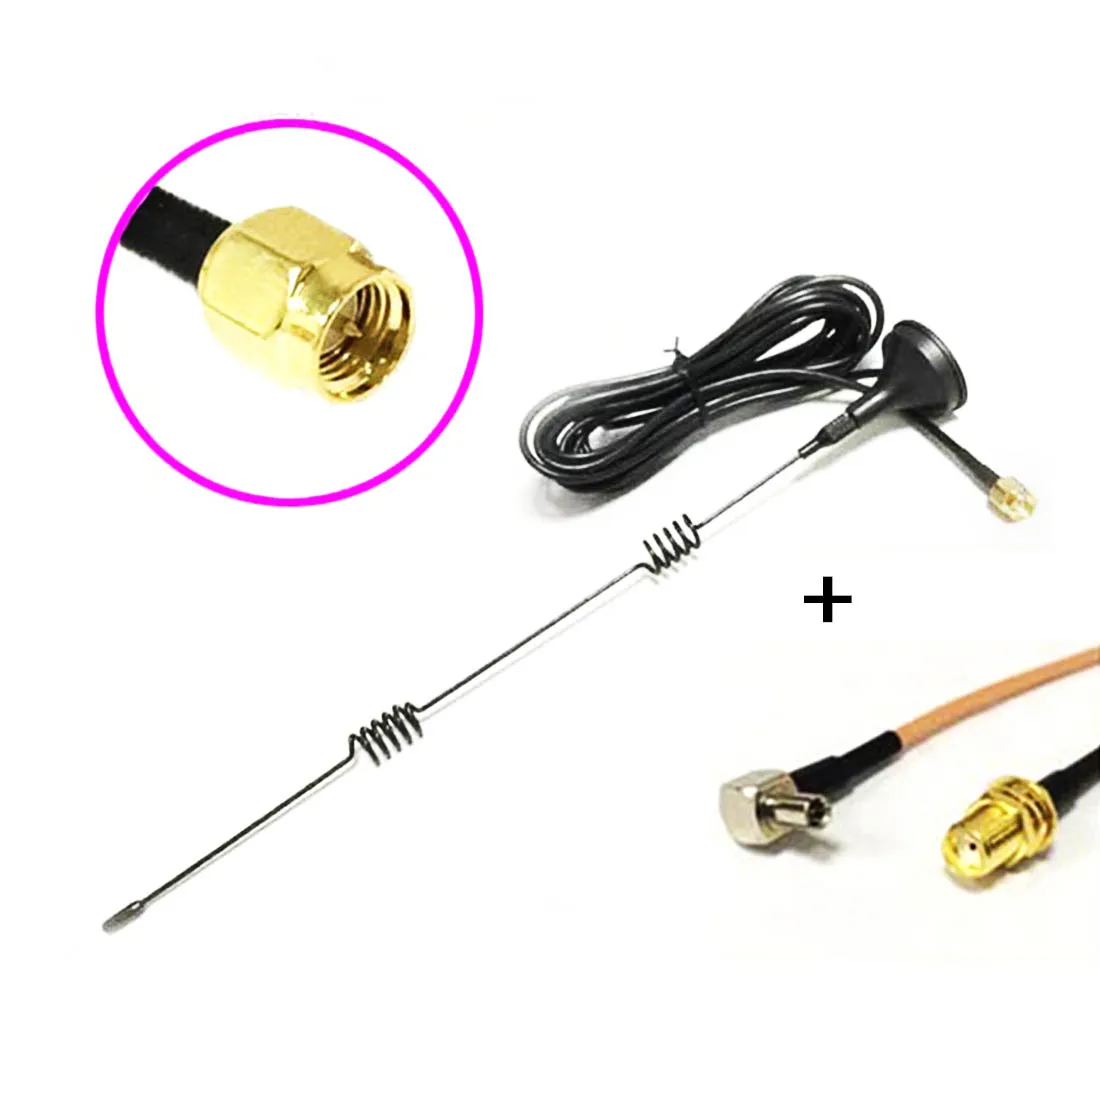 

800/850/900/1800/1900/2170 3G Antenna 5dBi Magnetic Base 3m Cable SMA Male + SMA Female to TS9 Male RG316 Cable 15cm 6inch